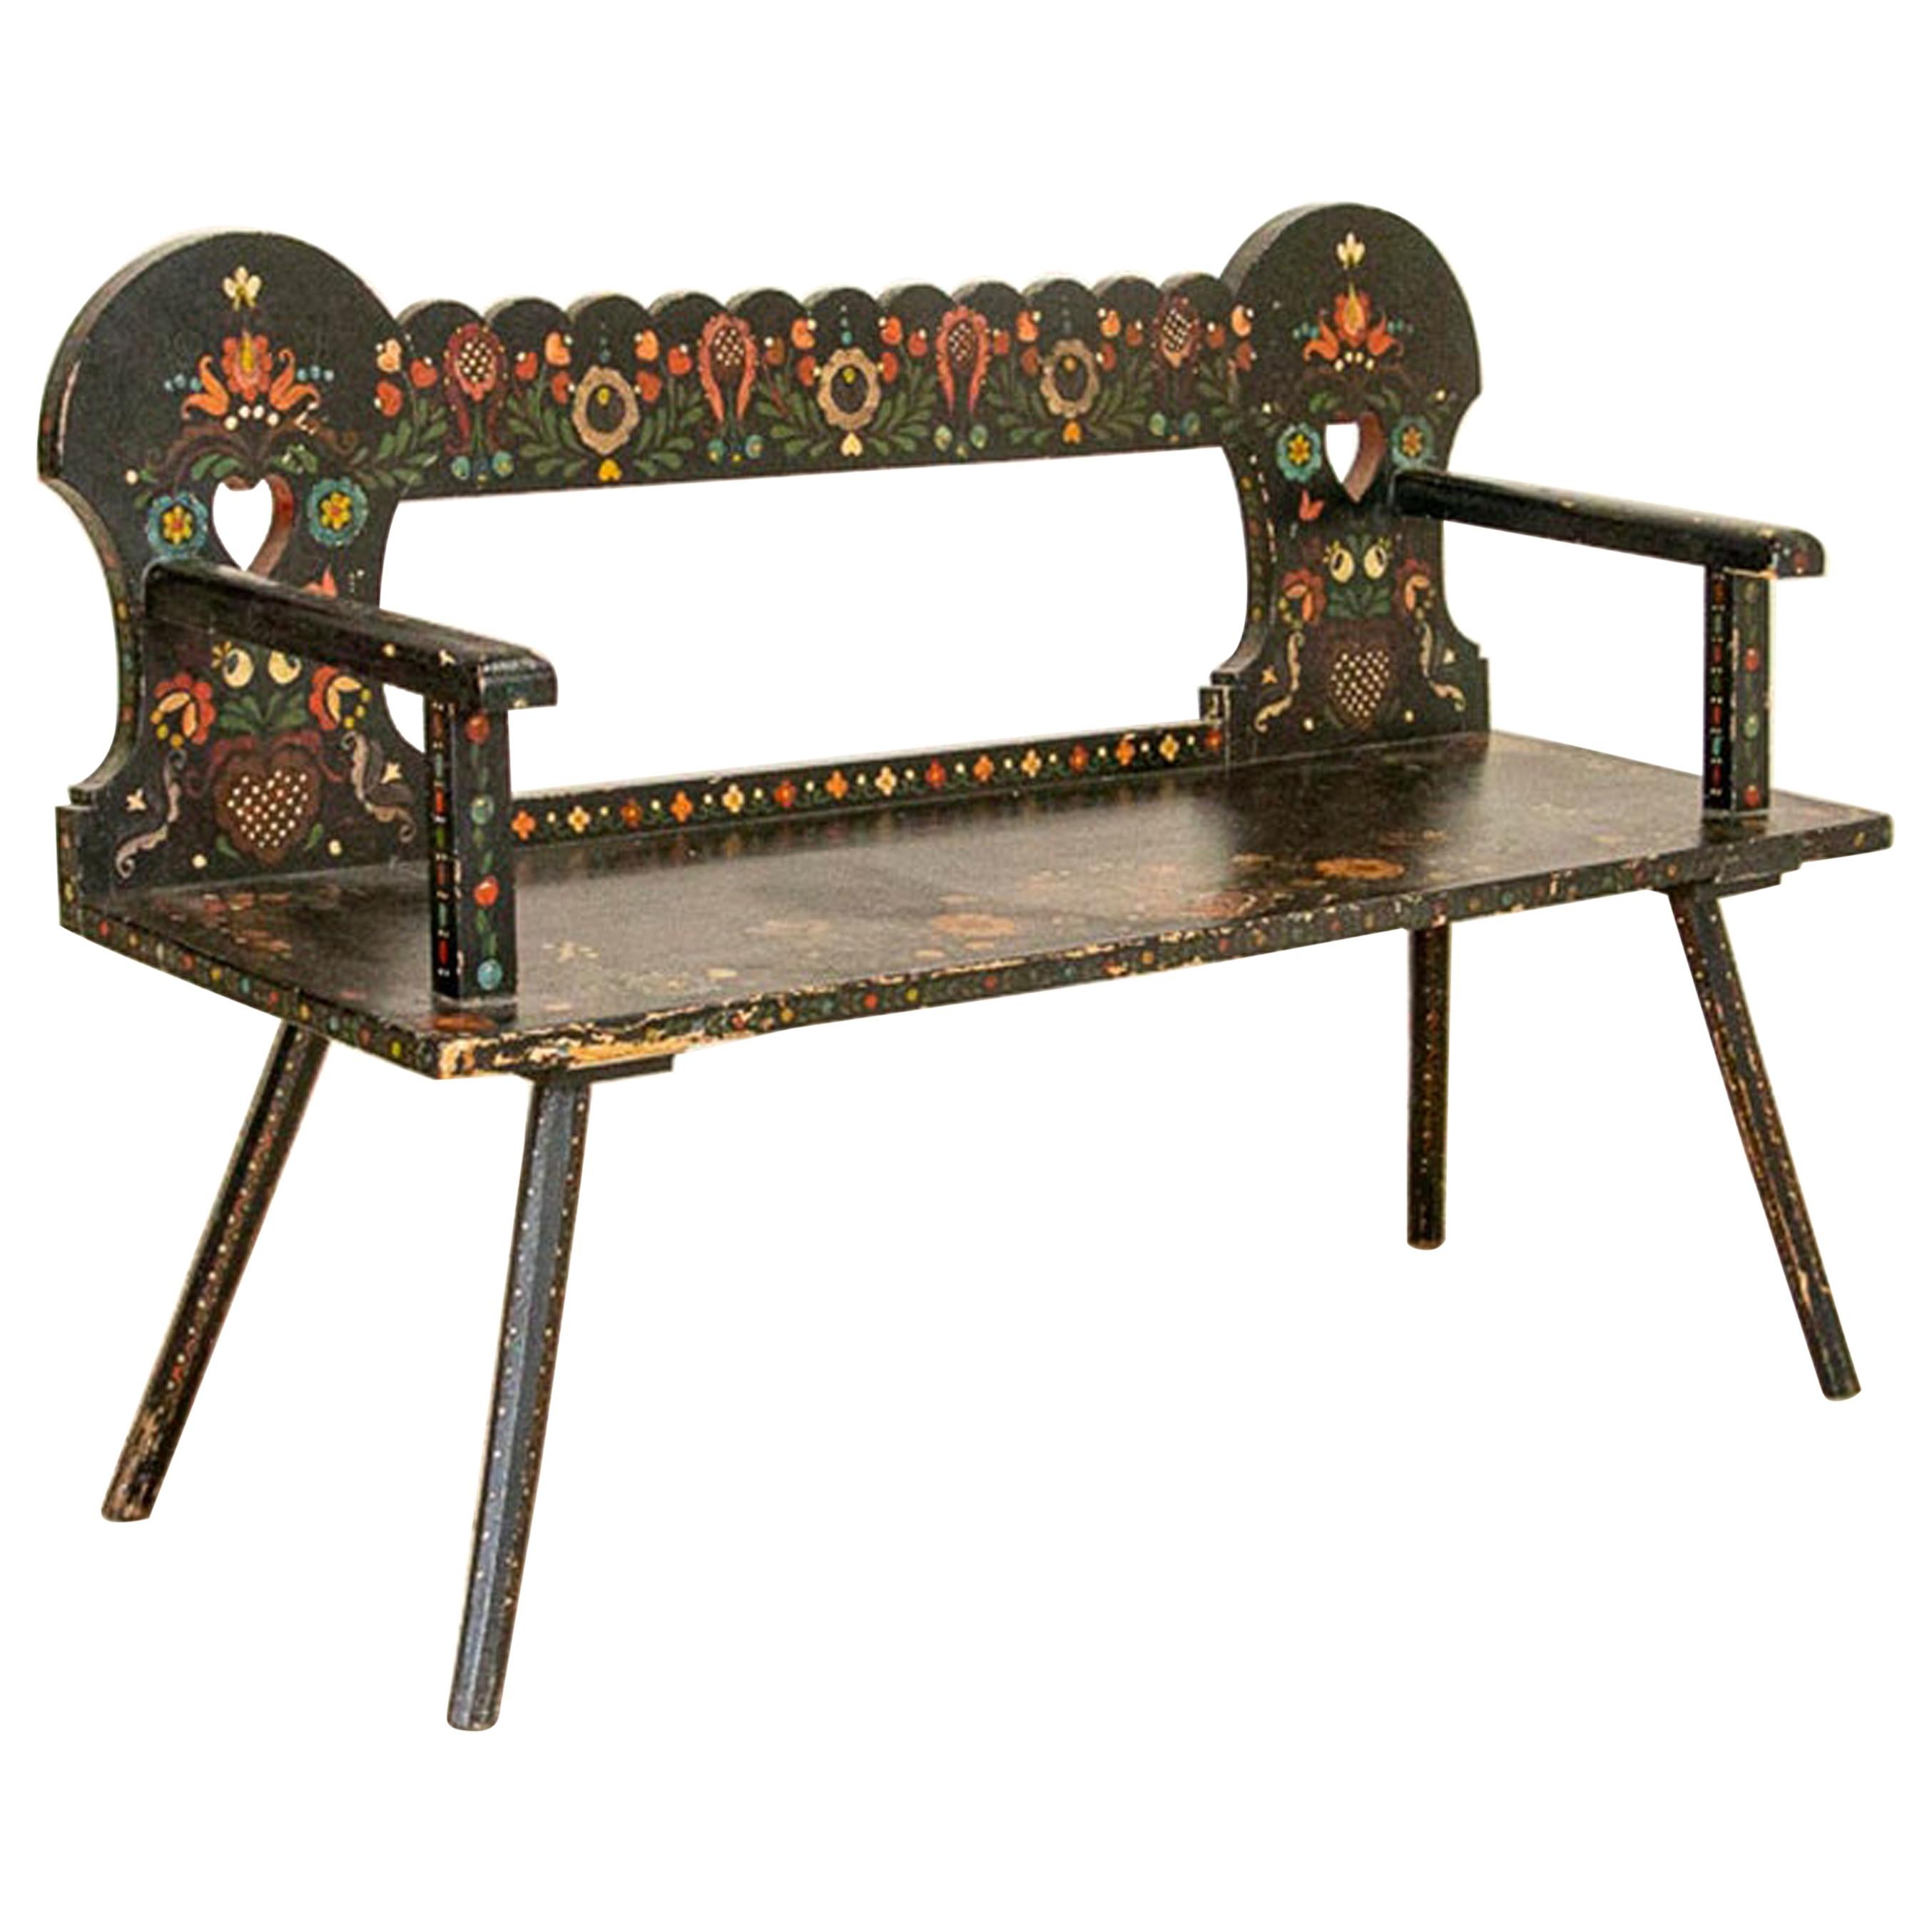 Antique Original Black Painted Bench with Bright Flowers